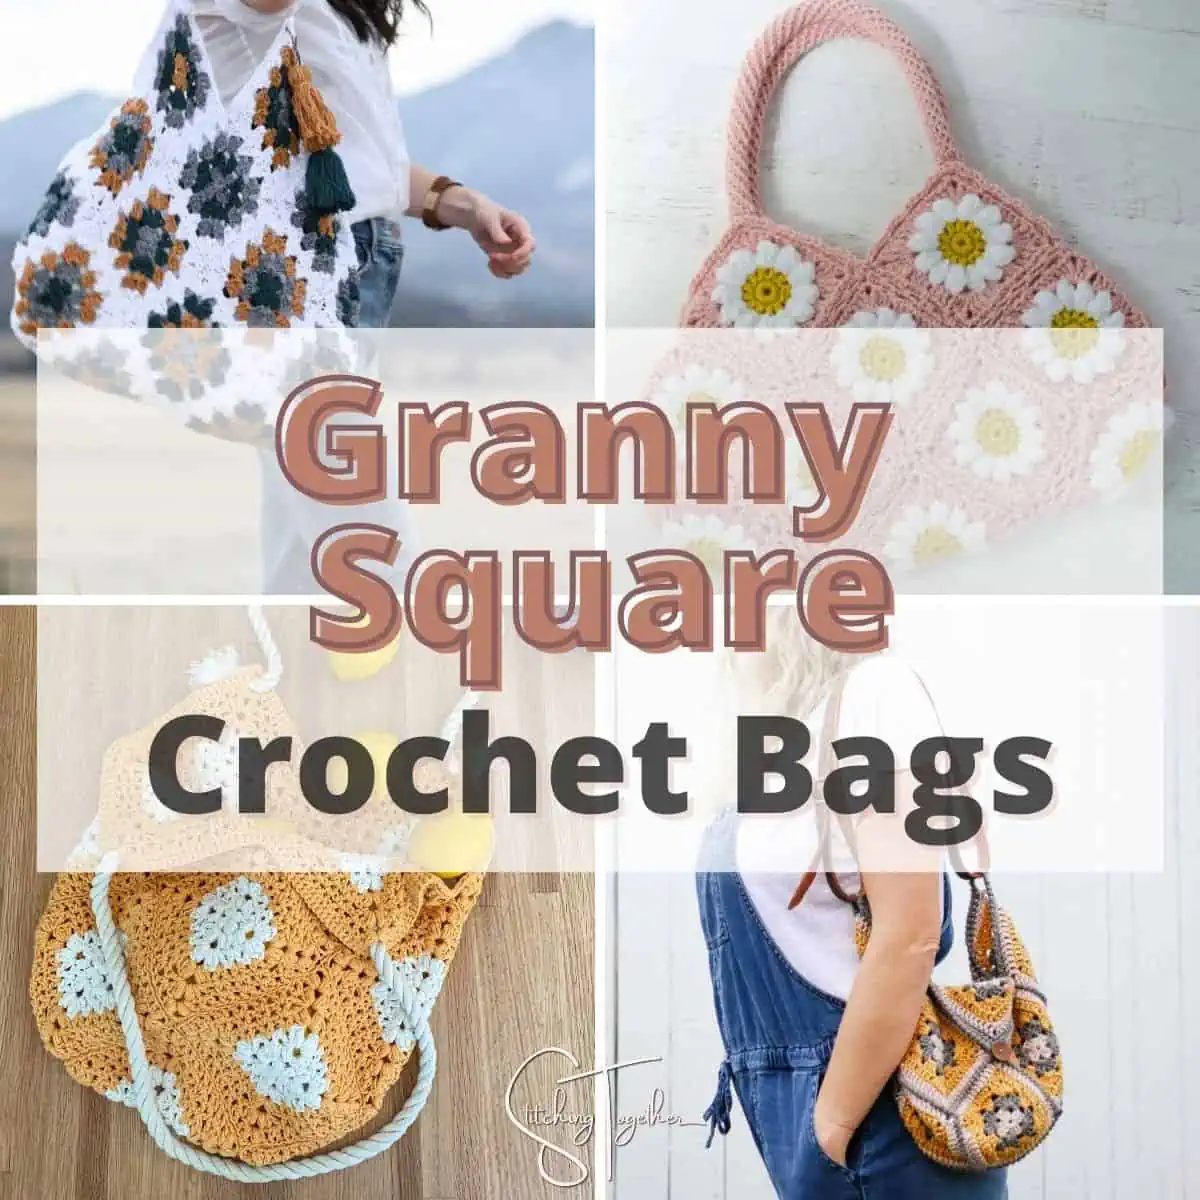 Granny squares tote bag Crochet pattern by Realm Designs | LoveCrafts